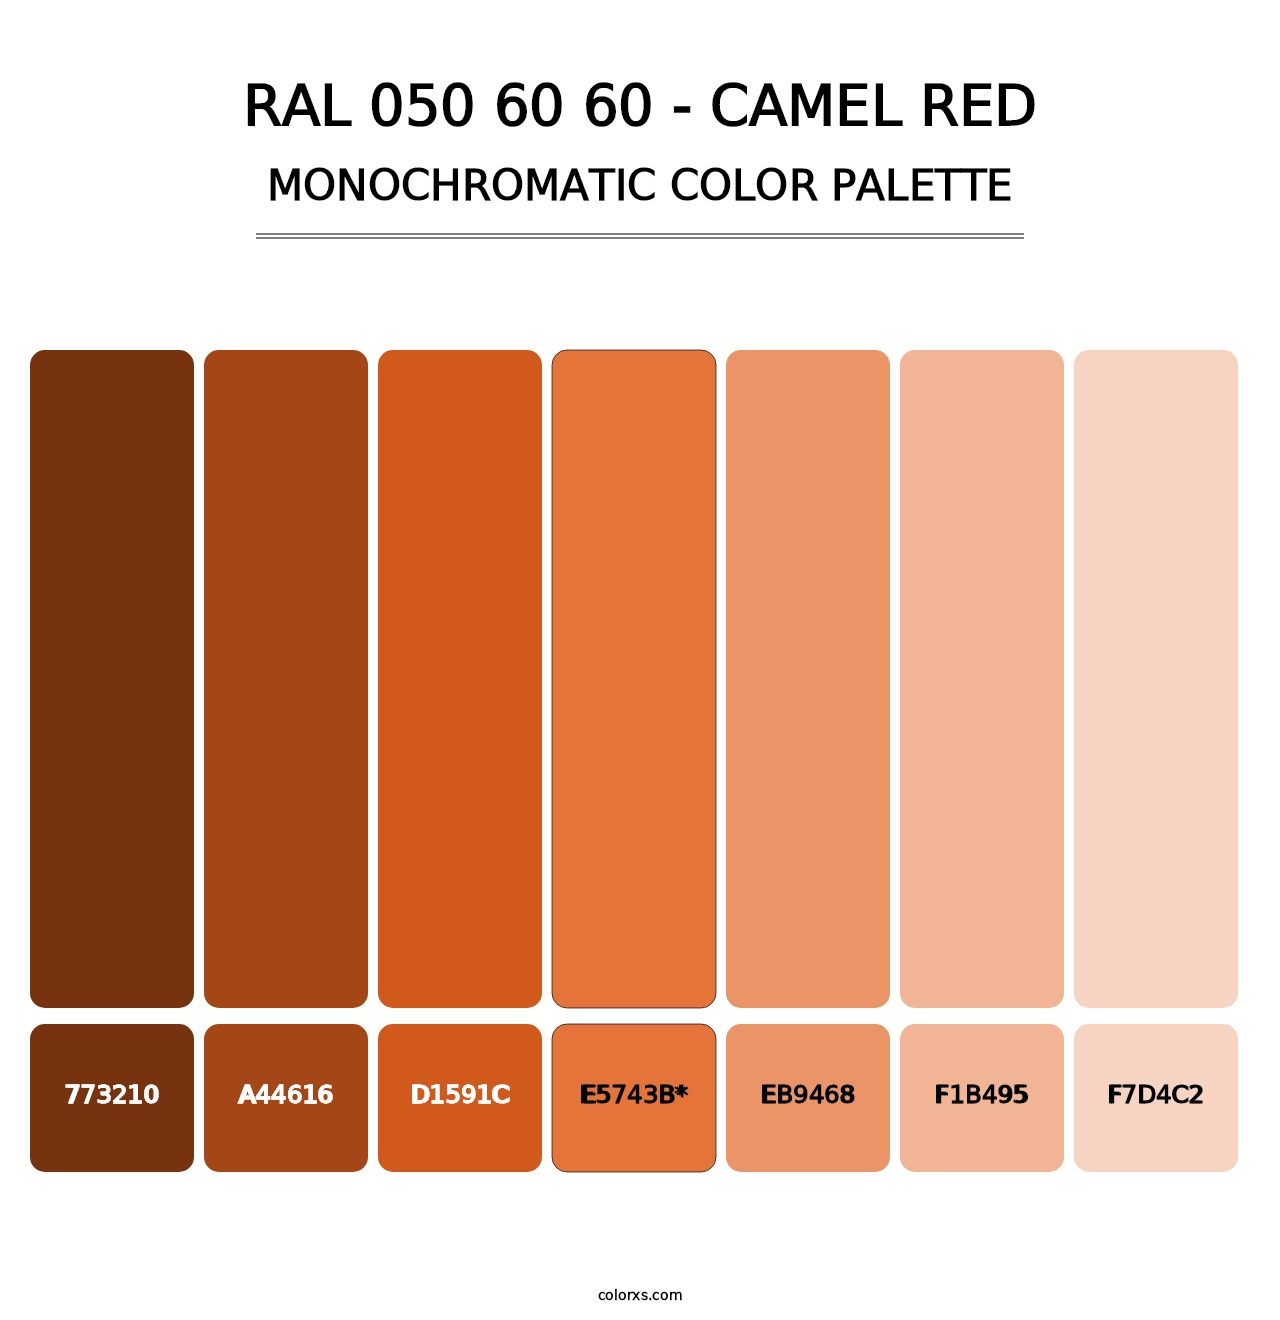 RAL 050 60 60 - Camel Red - Monochromatic Color Palette